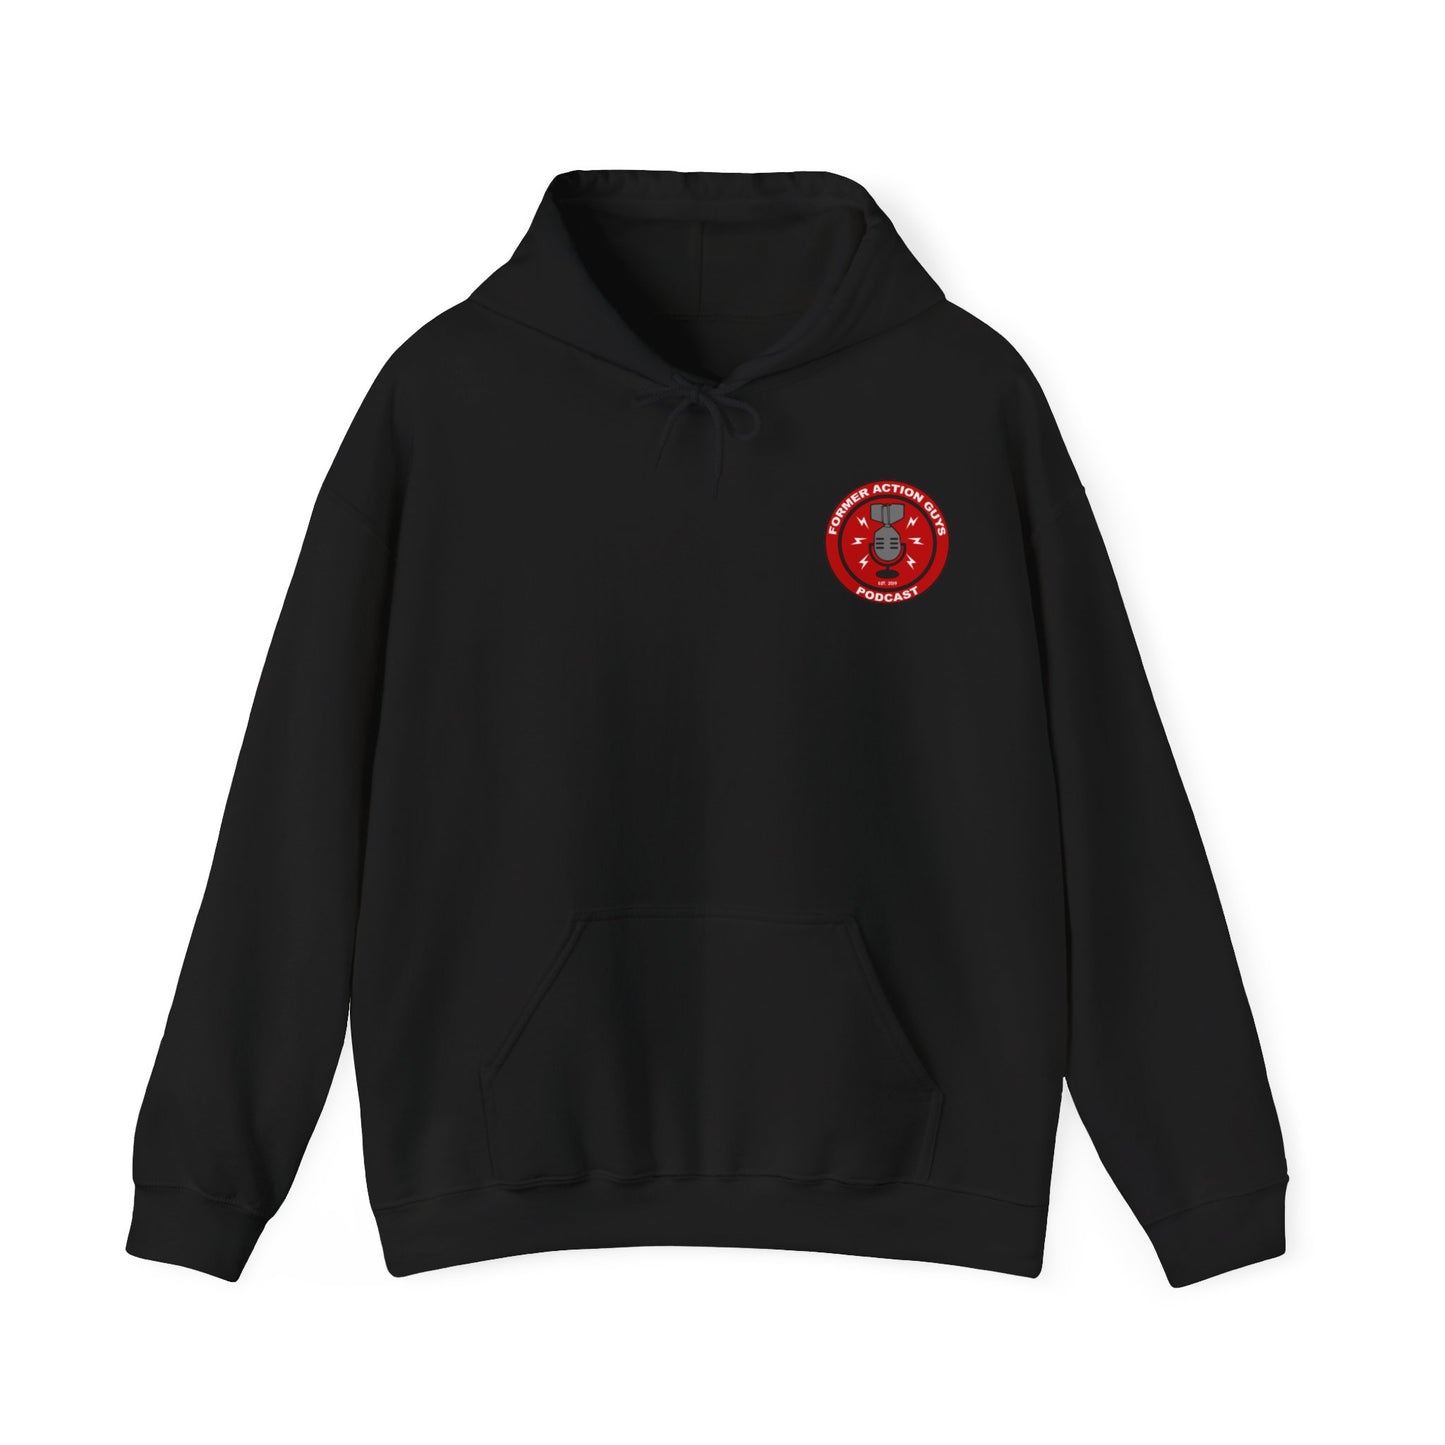 Former Action Guys Podcast Hoodie